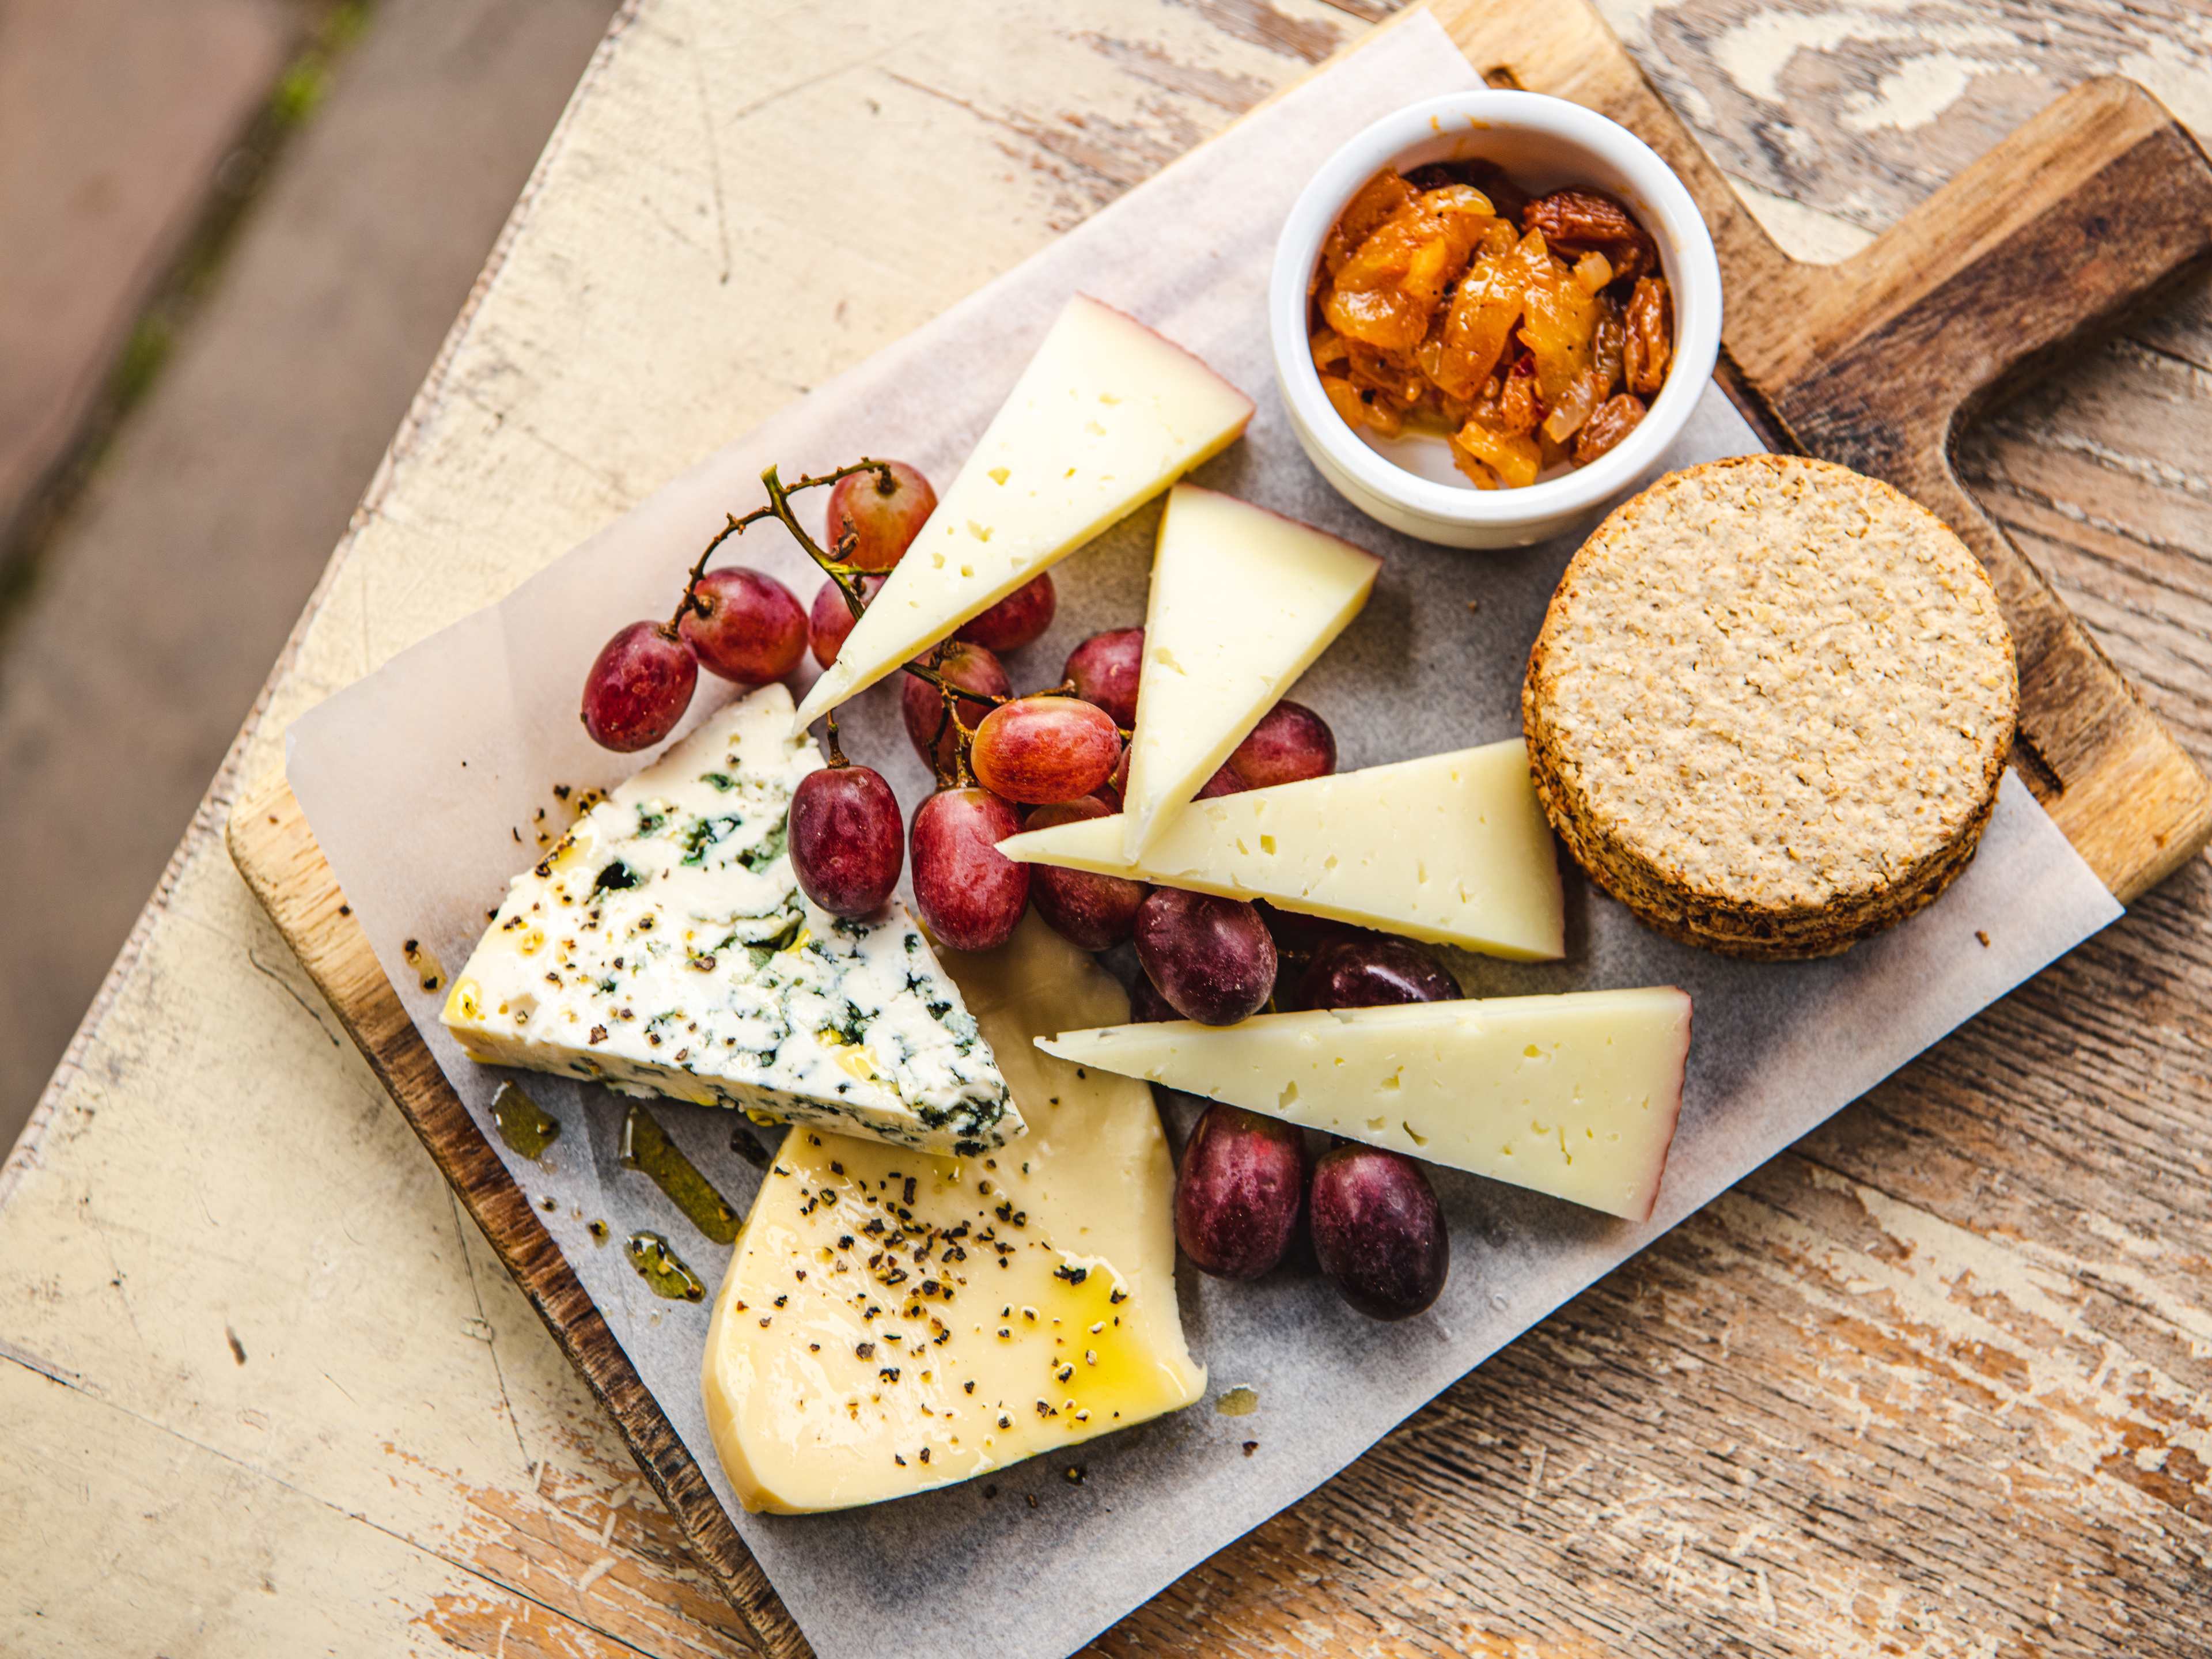 A Spanish cheese platter from Norfolk Arms.